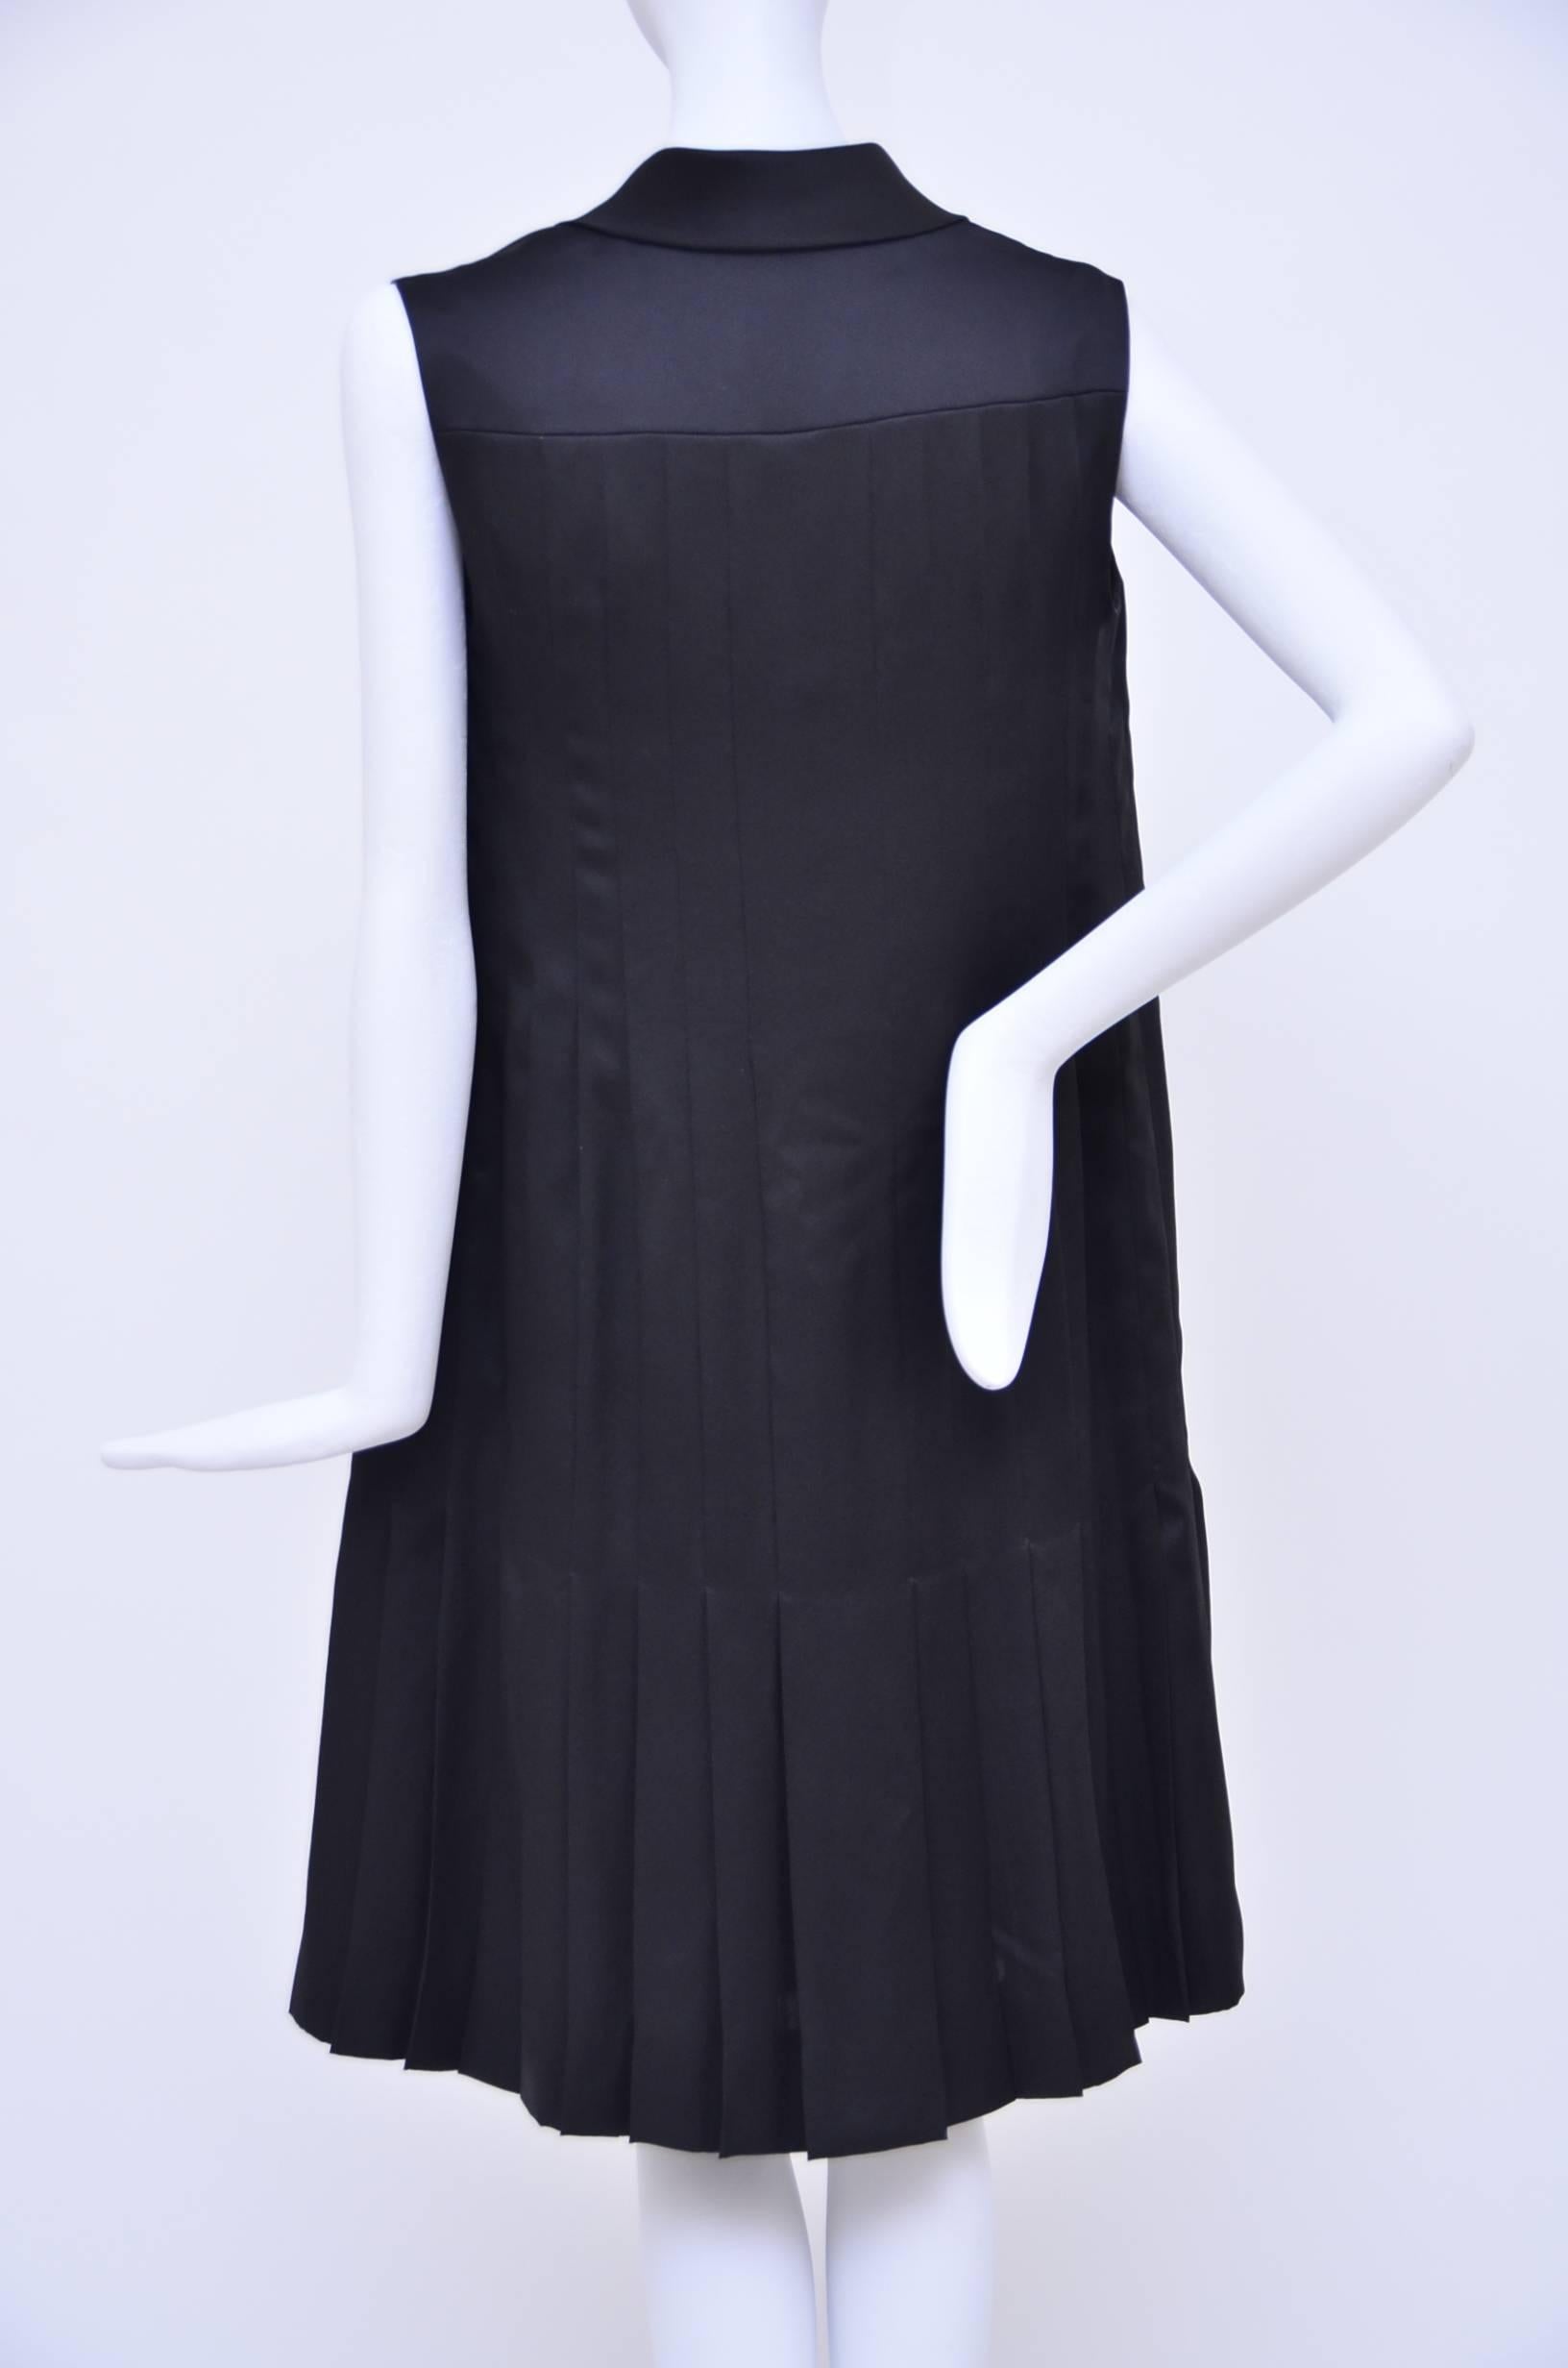 Chanel Haute Couture black pleated dress.
Fabric 100% silk.
Mint condition,like new.No stains and color is black and show no fading.
Fabric is black with  silky  shine finish.Lined in silk fabric.Tiny button closure in the